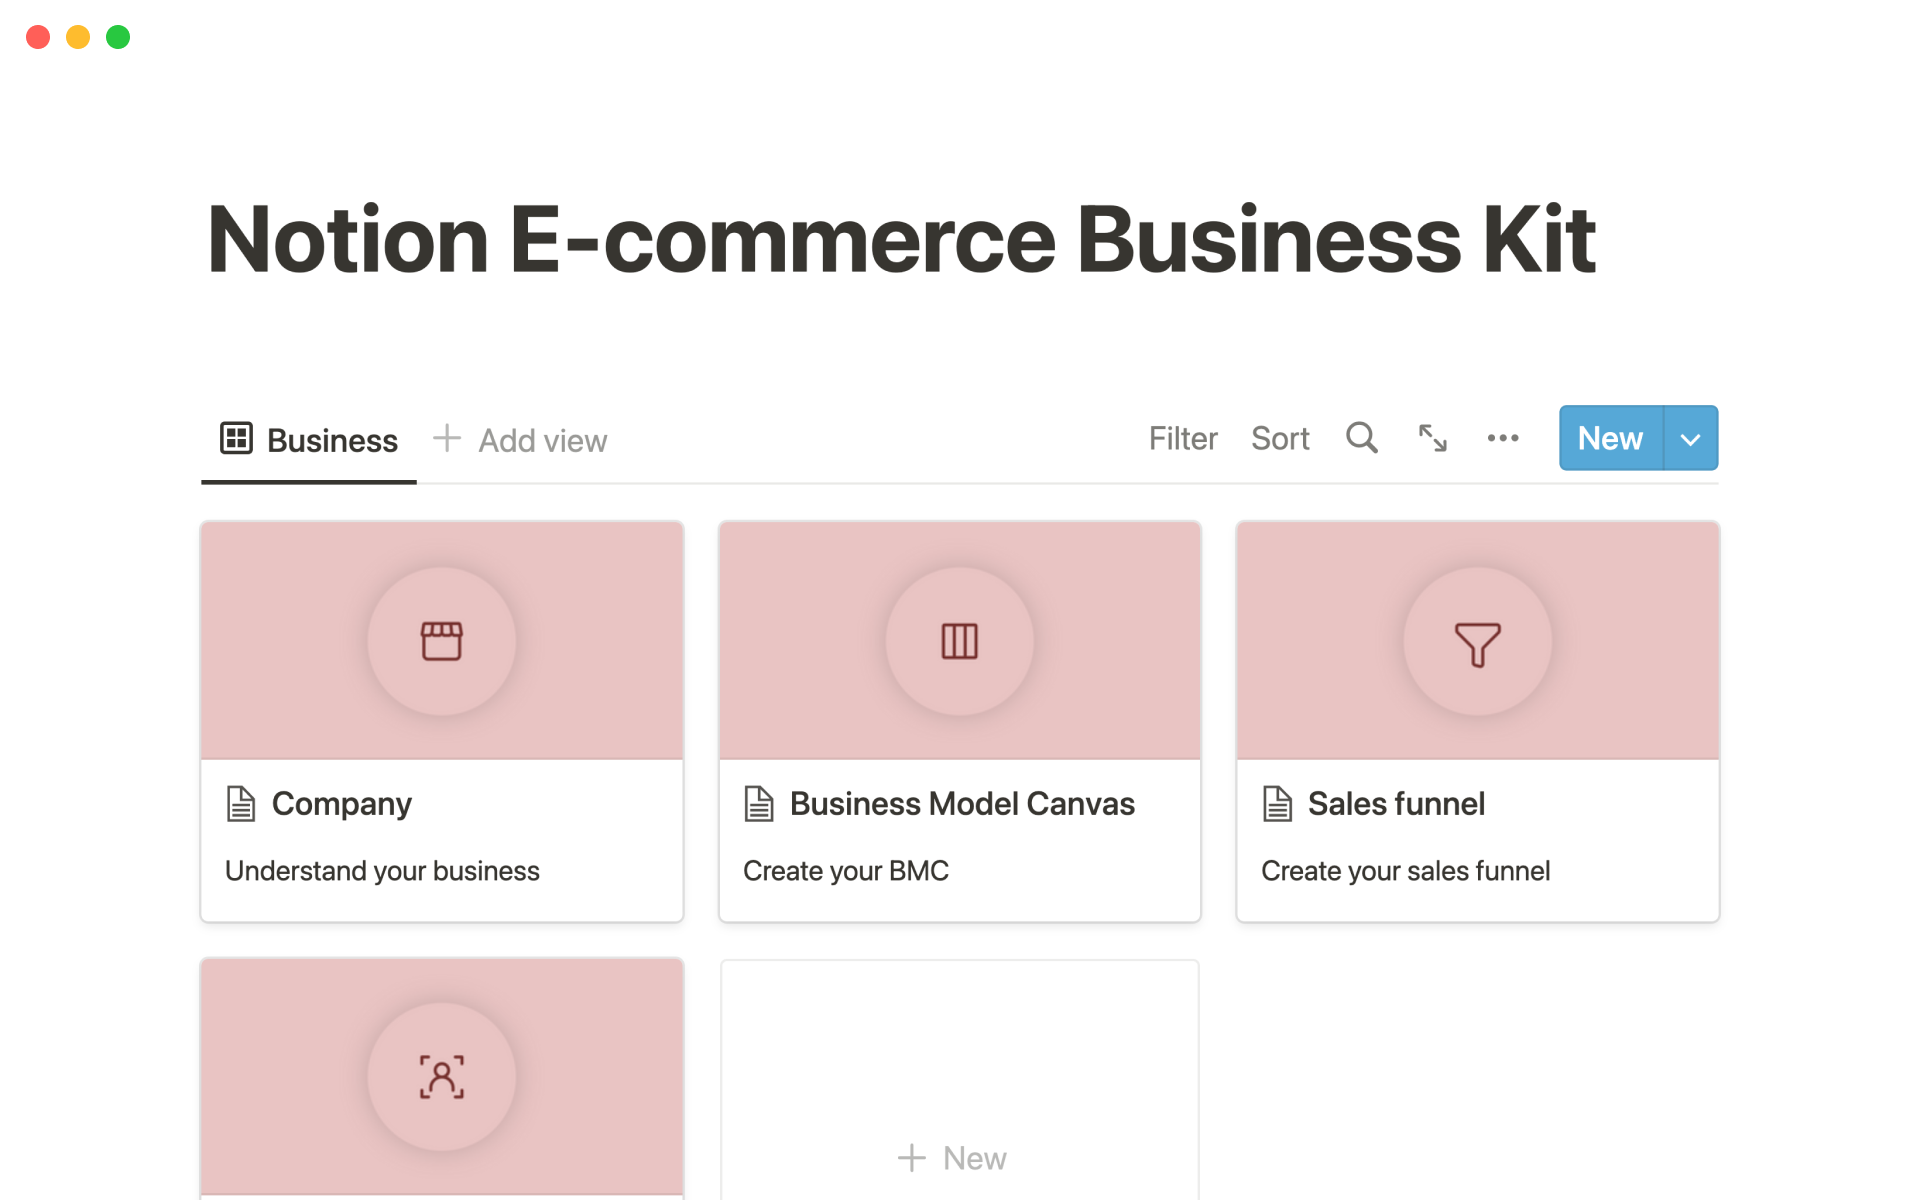 Everything you need to run a successful e-commerce business from one place.